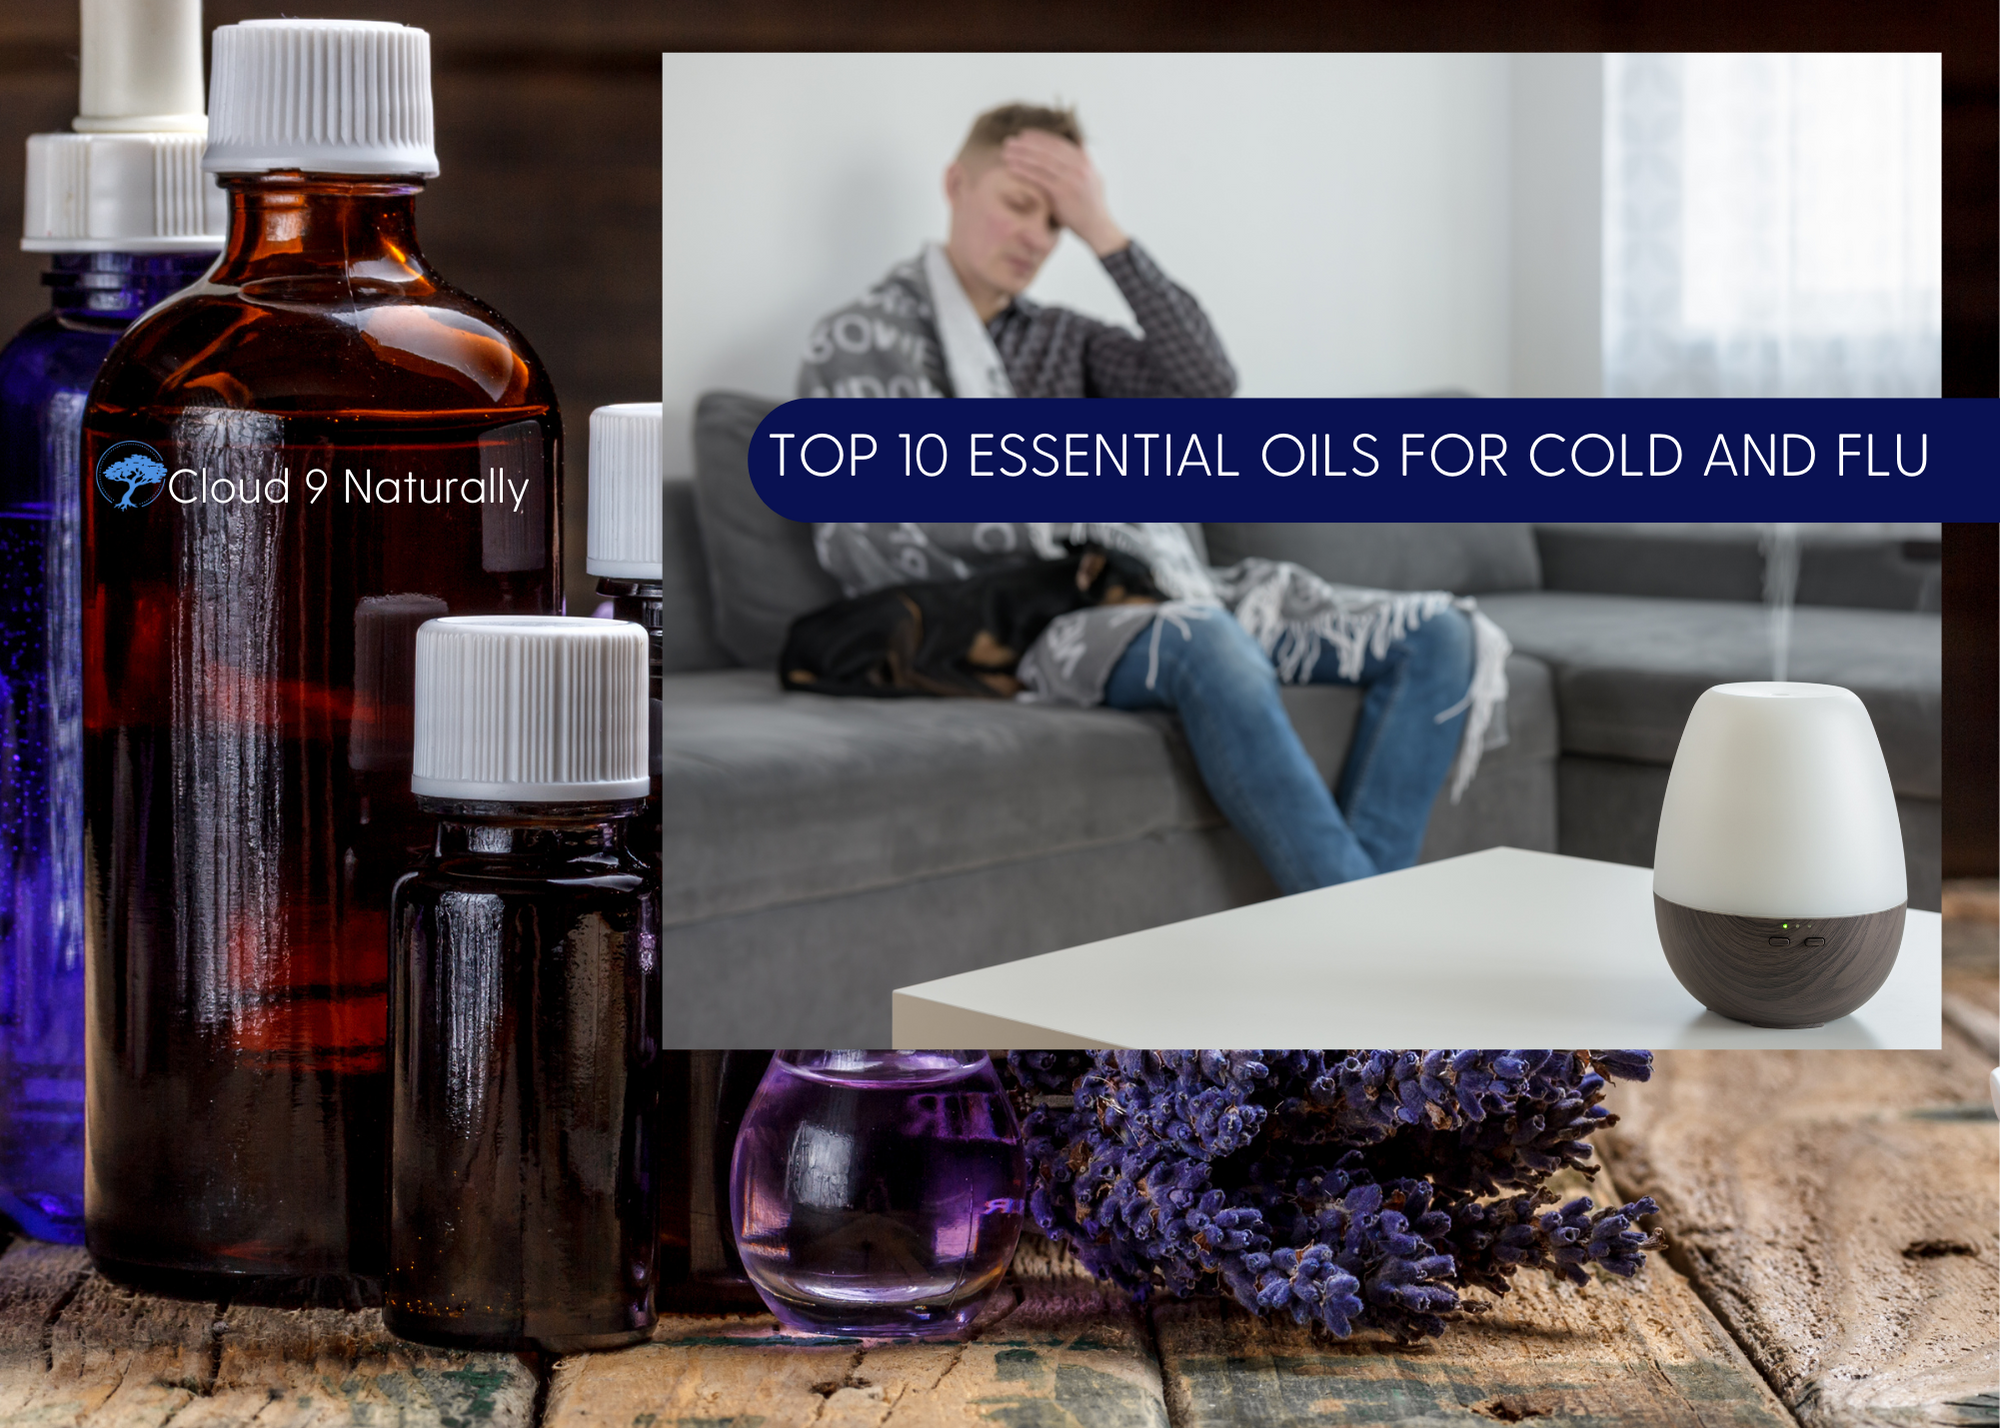 Top 10 Essential Oils for Cold and Flu